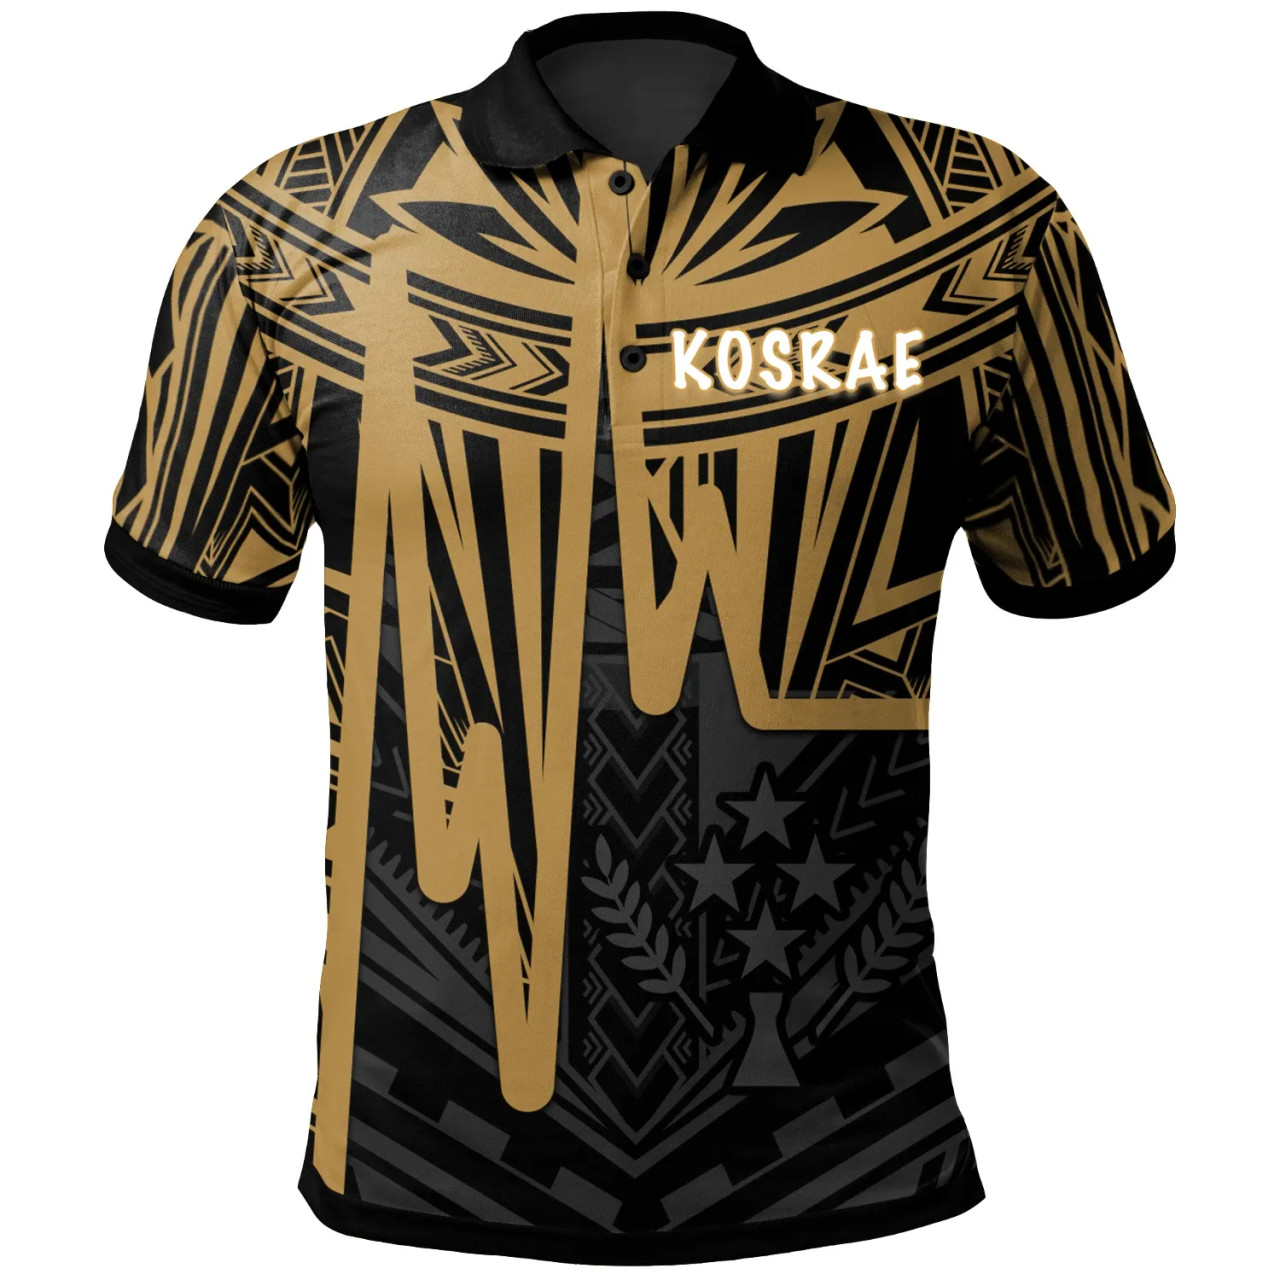 Kosrae Polo Shirts - Kosrae Seal In Heartbeat Patterns Style (Gold) 1